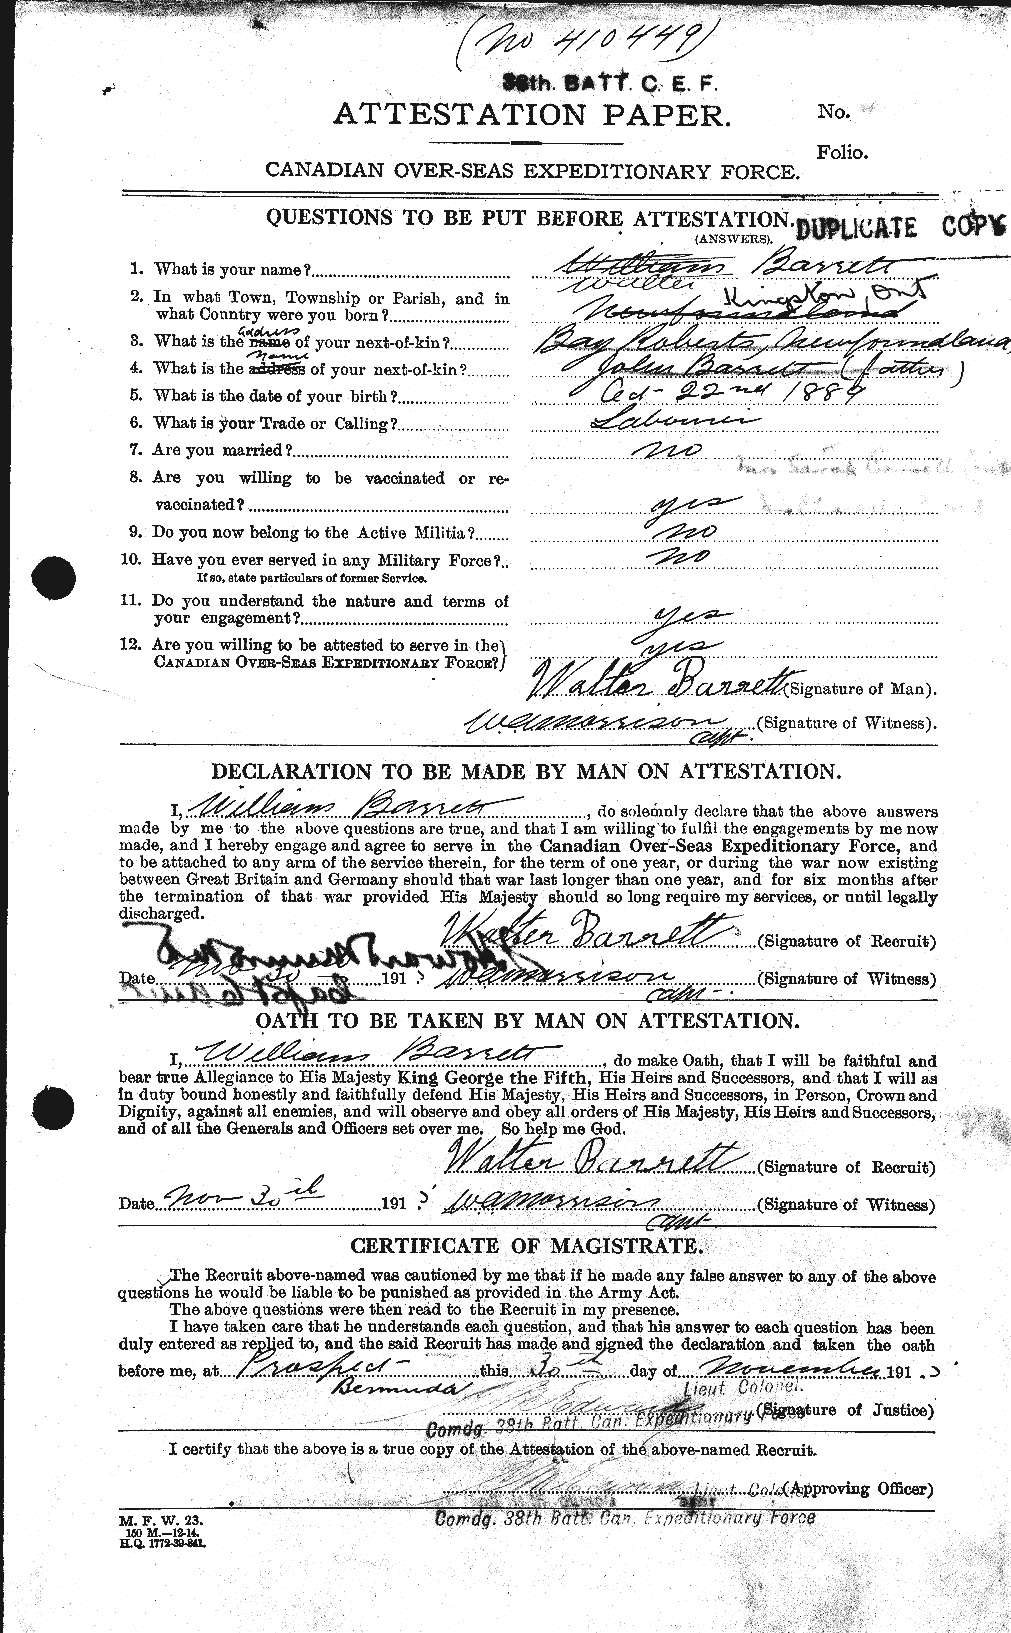 Personnel Records of the First World War - CEF 220154a